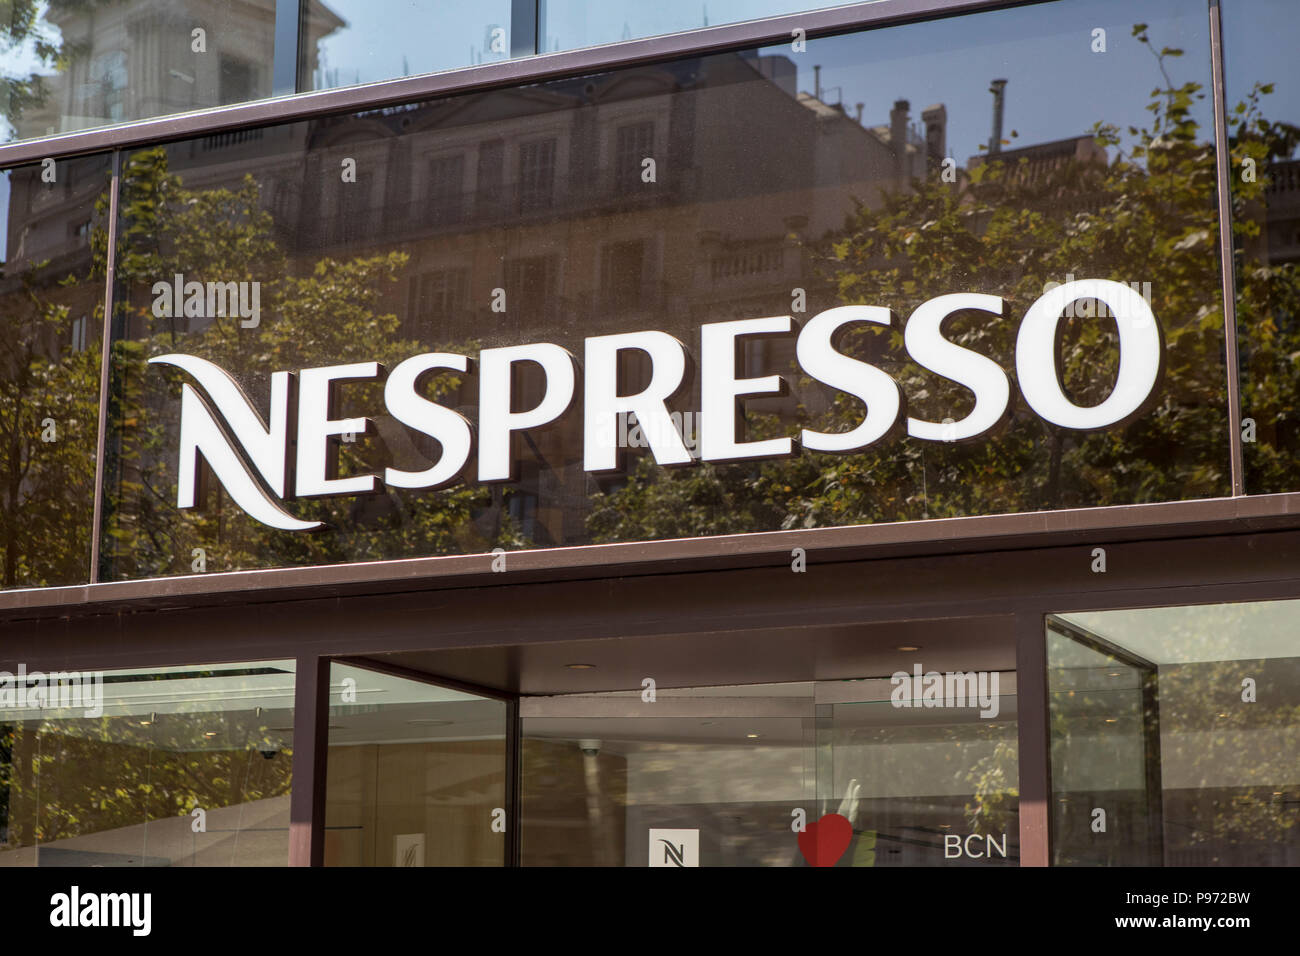 Nespresso Sign High Resolution Stock Photography and Images - Alamy